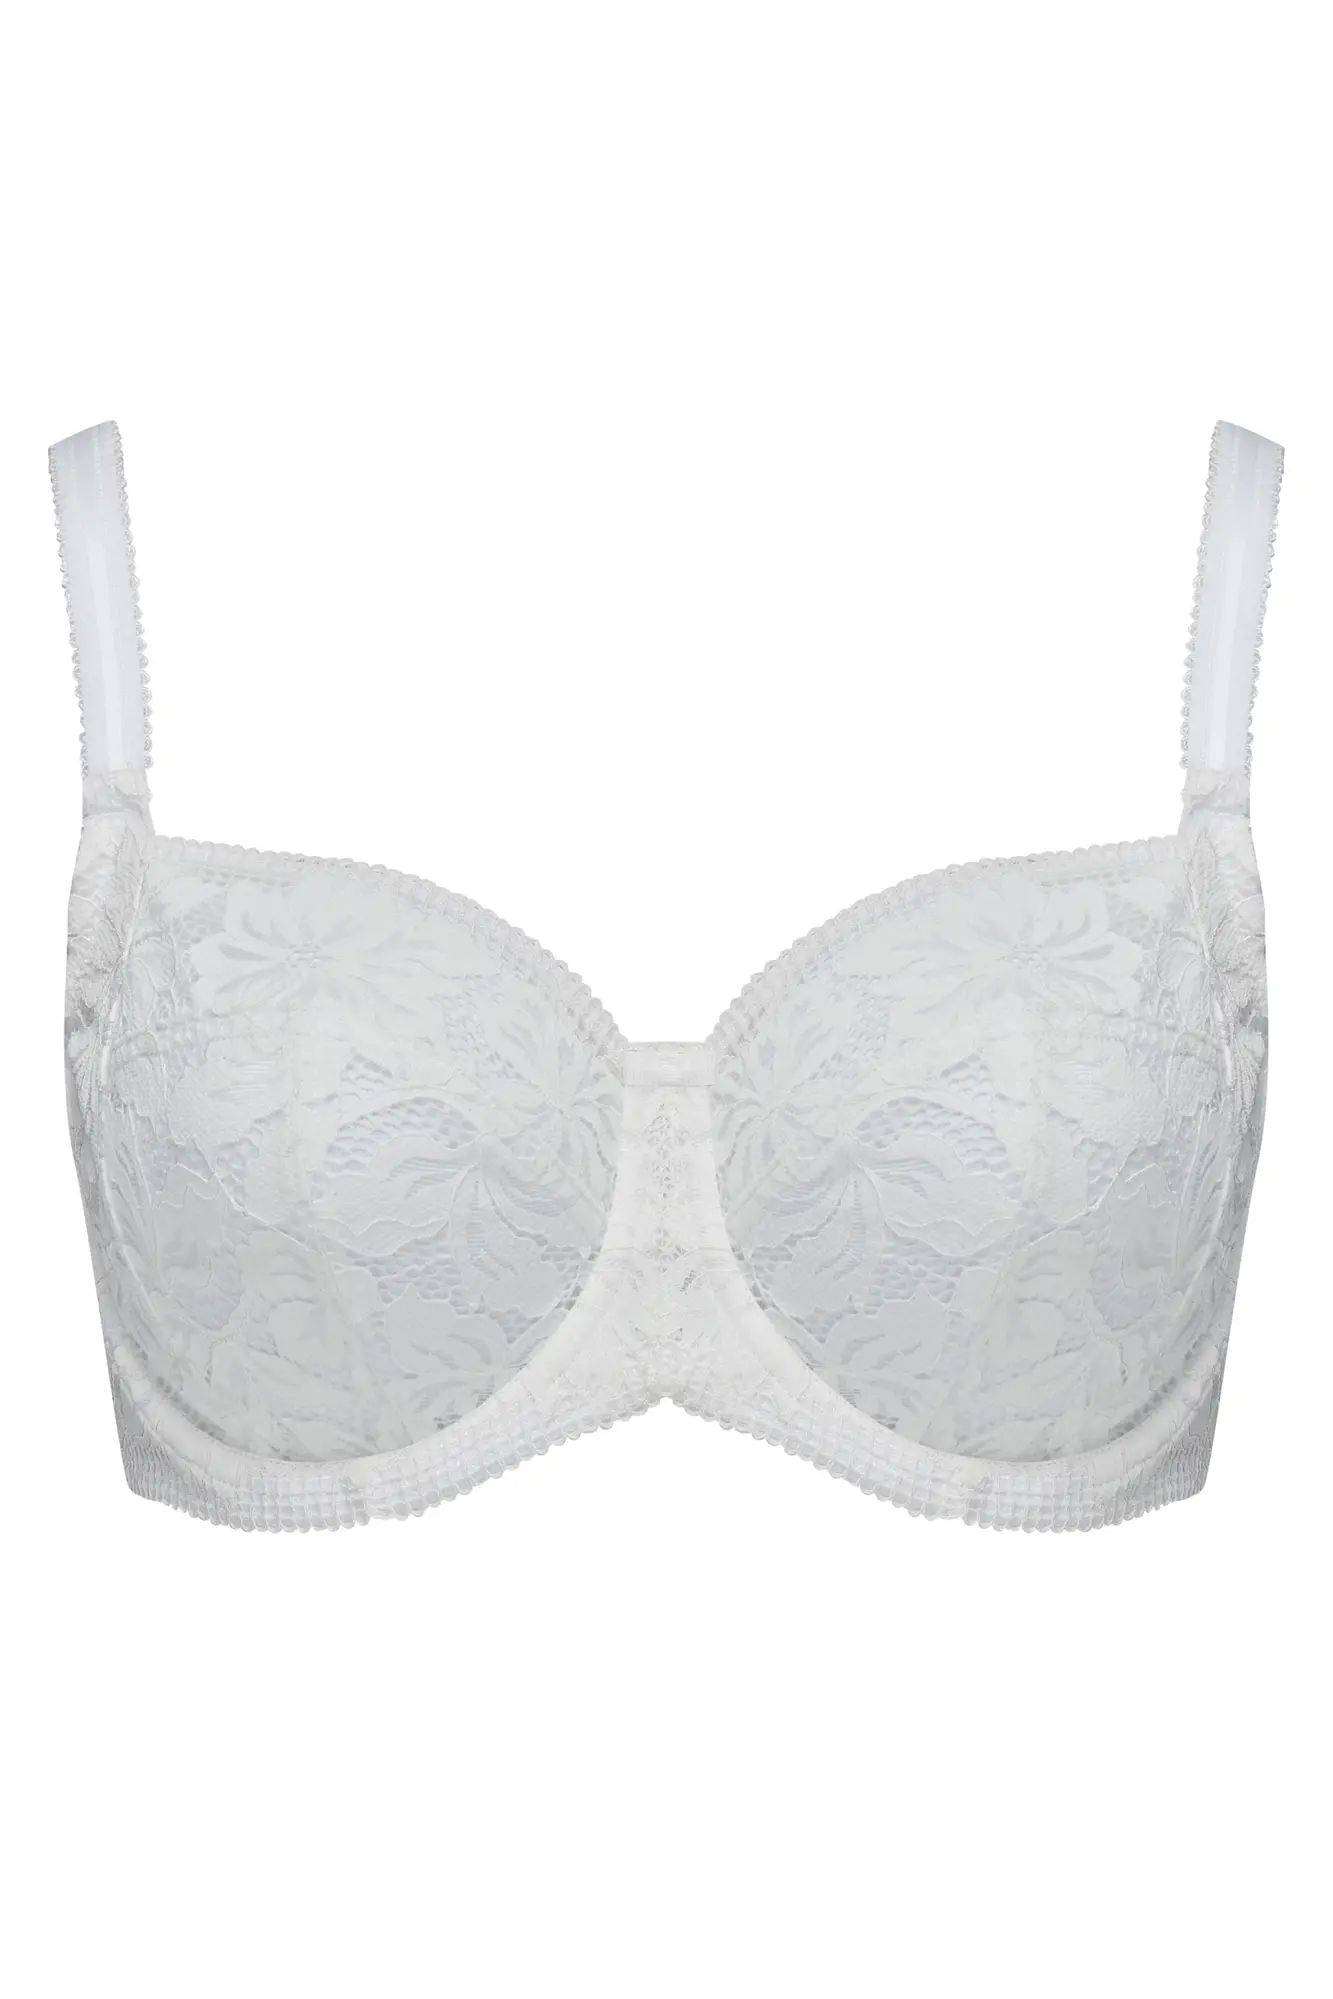 Reflection Side Support Bra in White | Pour Moi